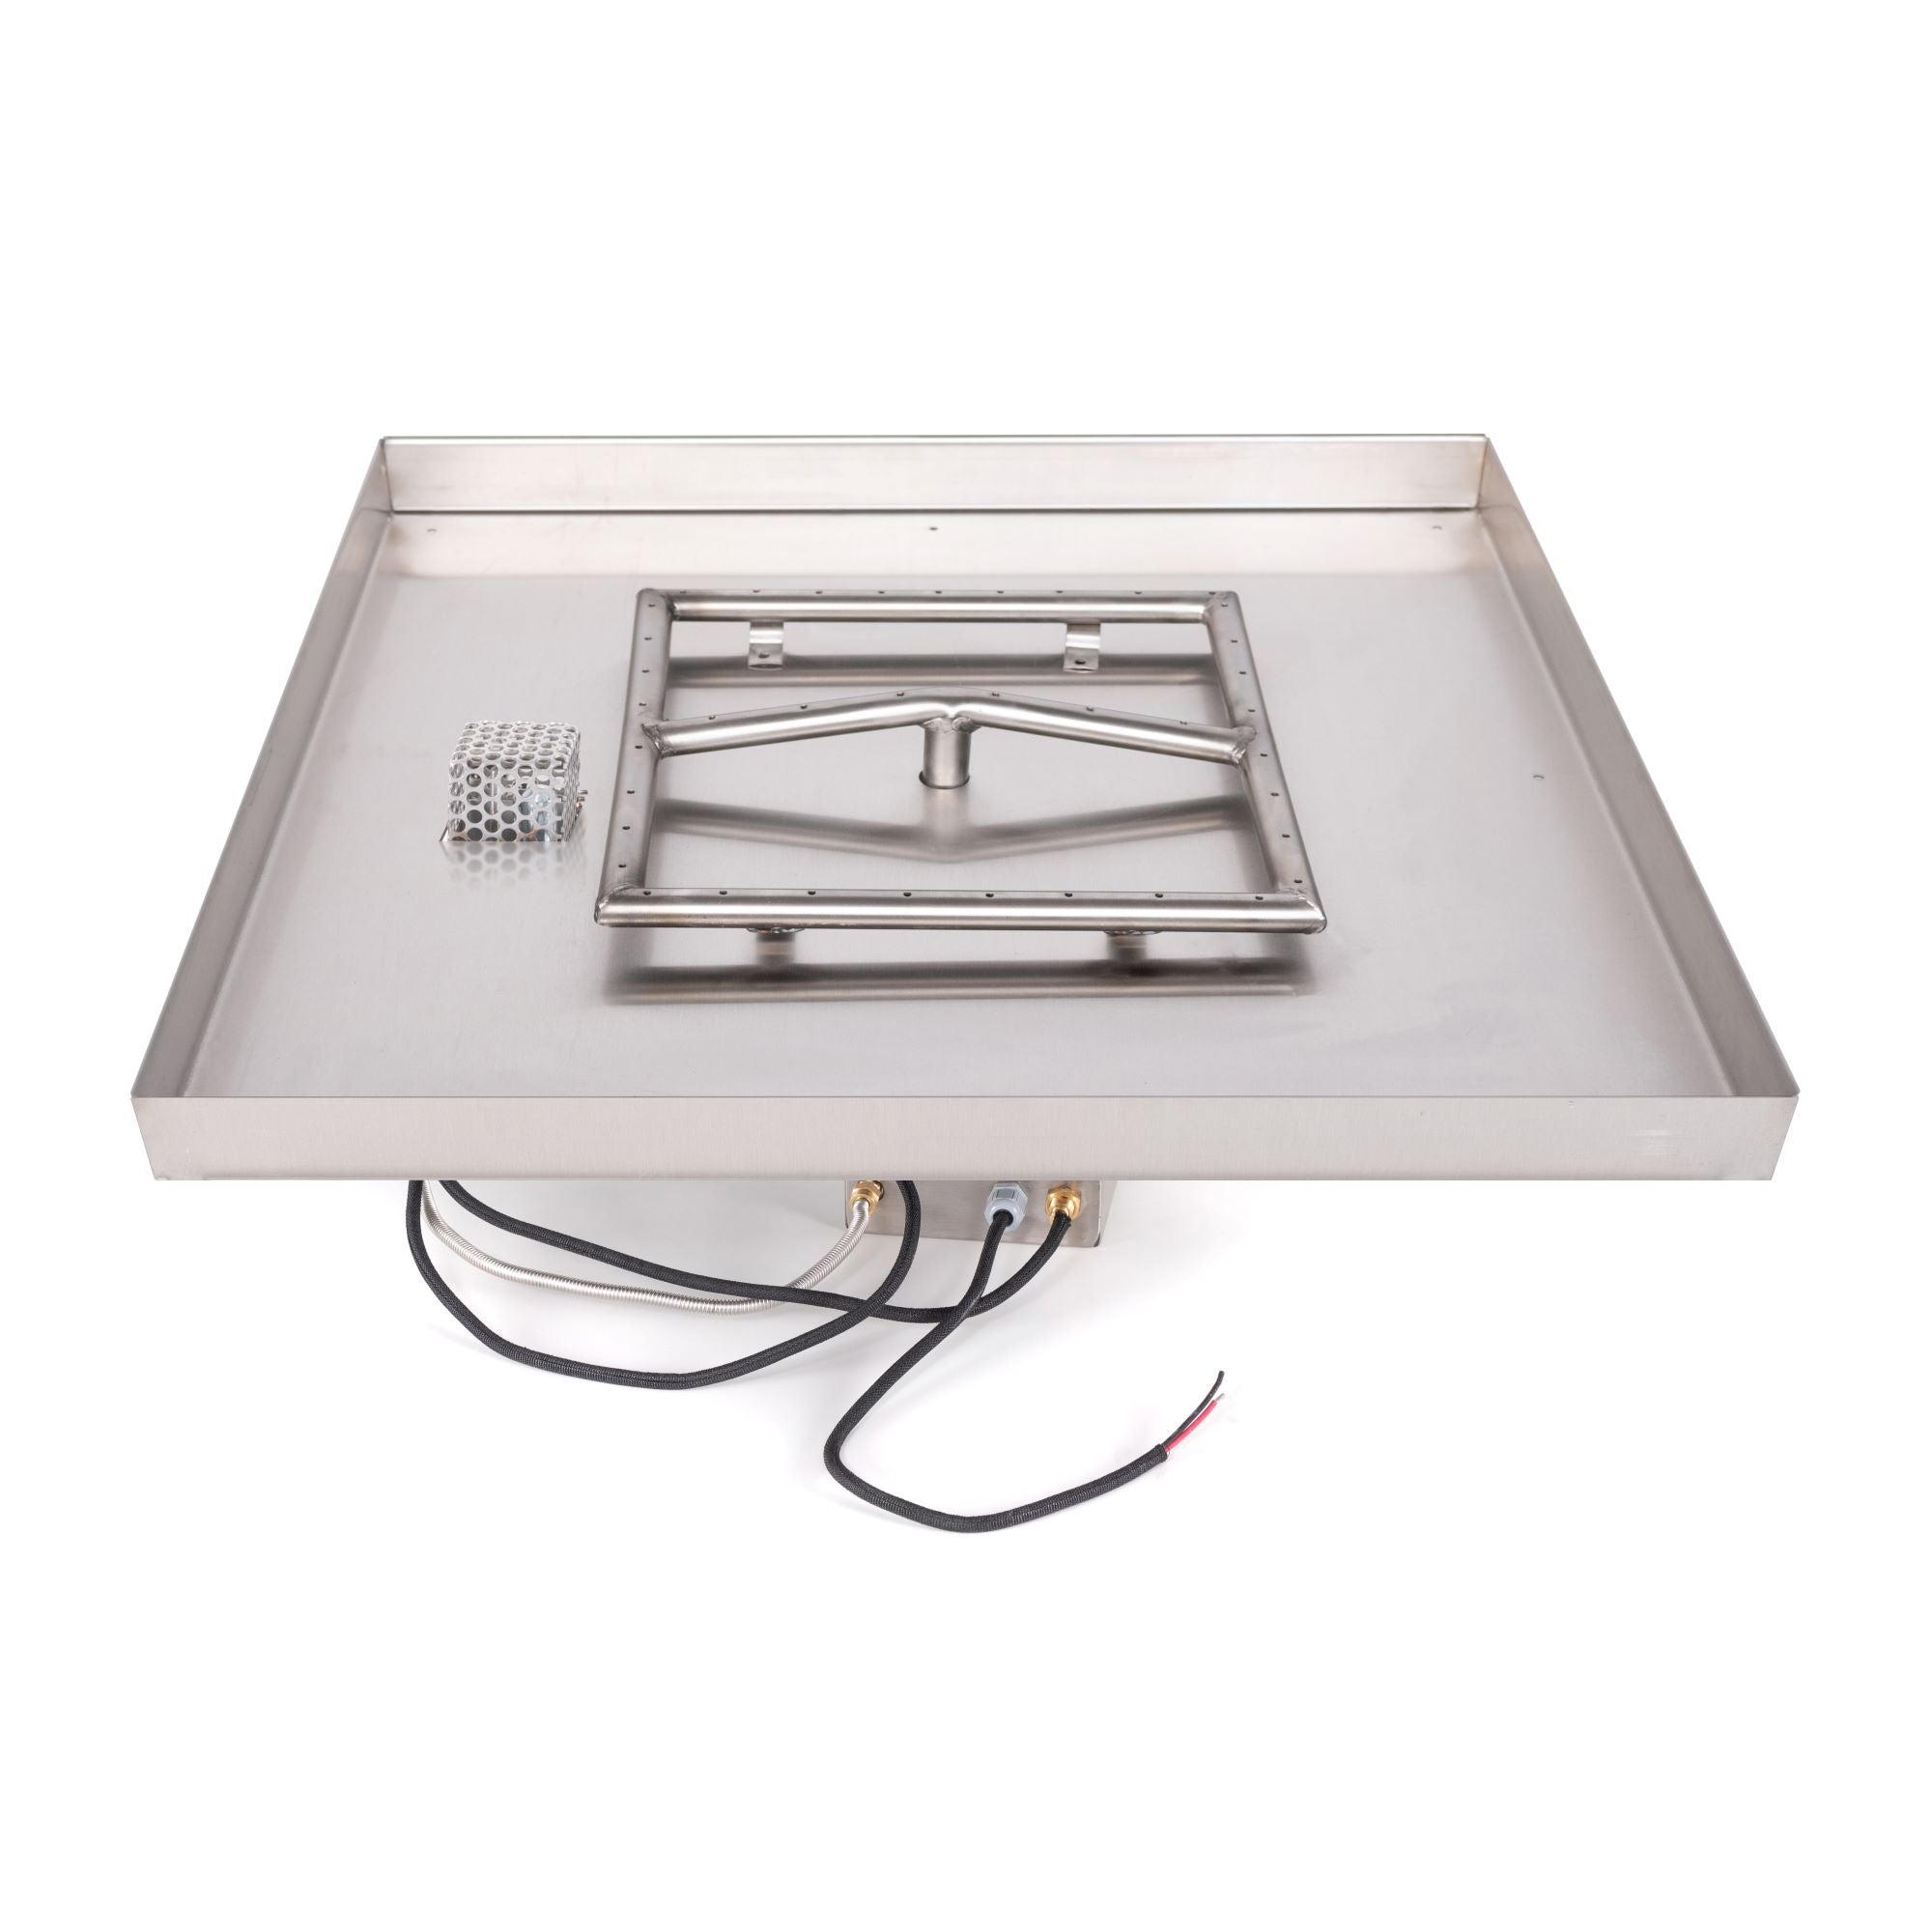 The Outdoor Plus Square Lipless Drop-in Pan with Stainless Steel Square Burner